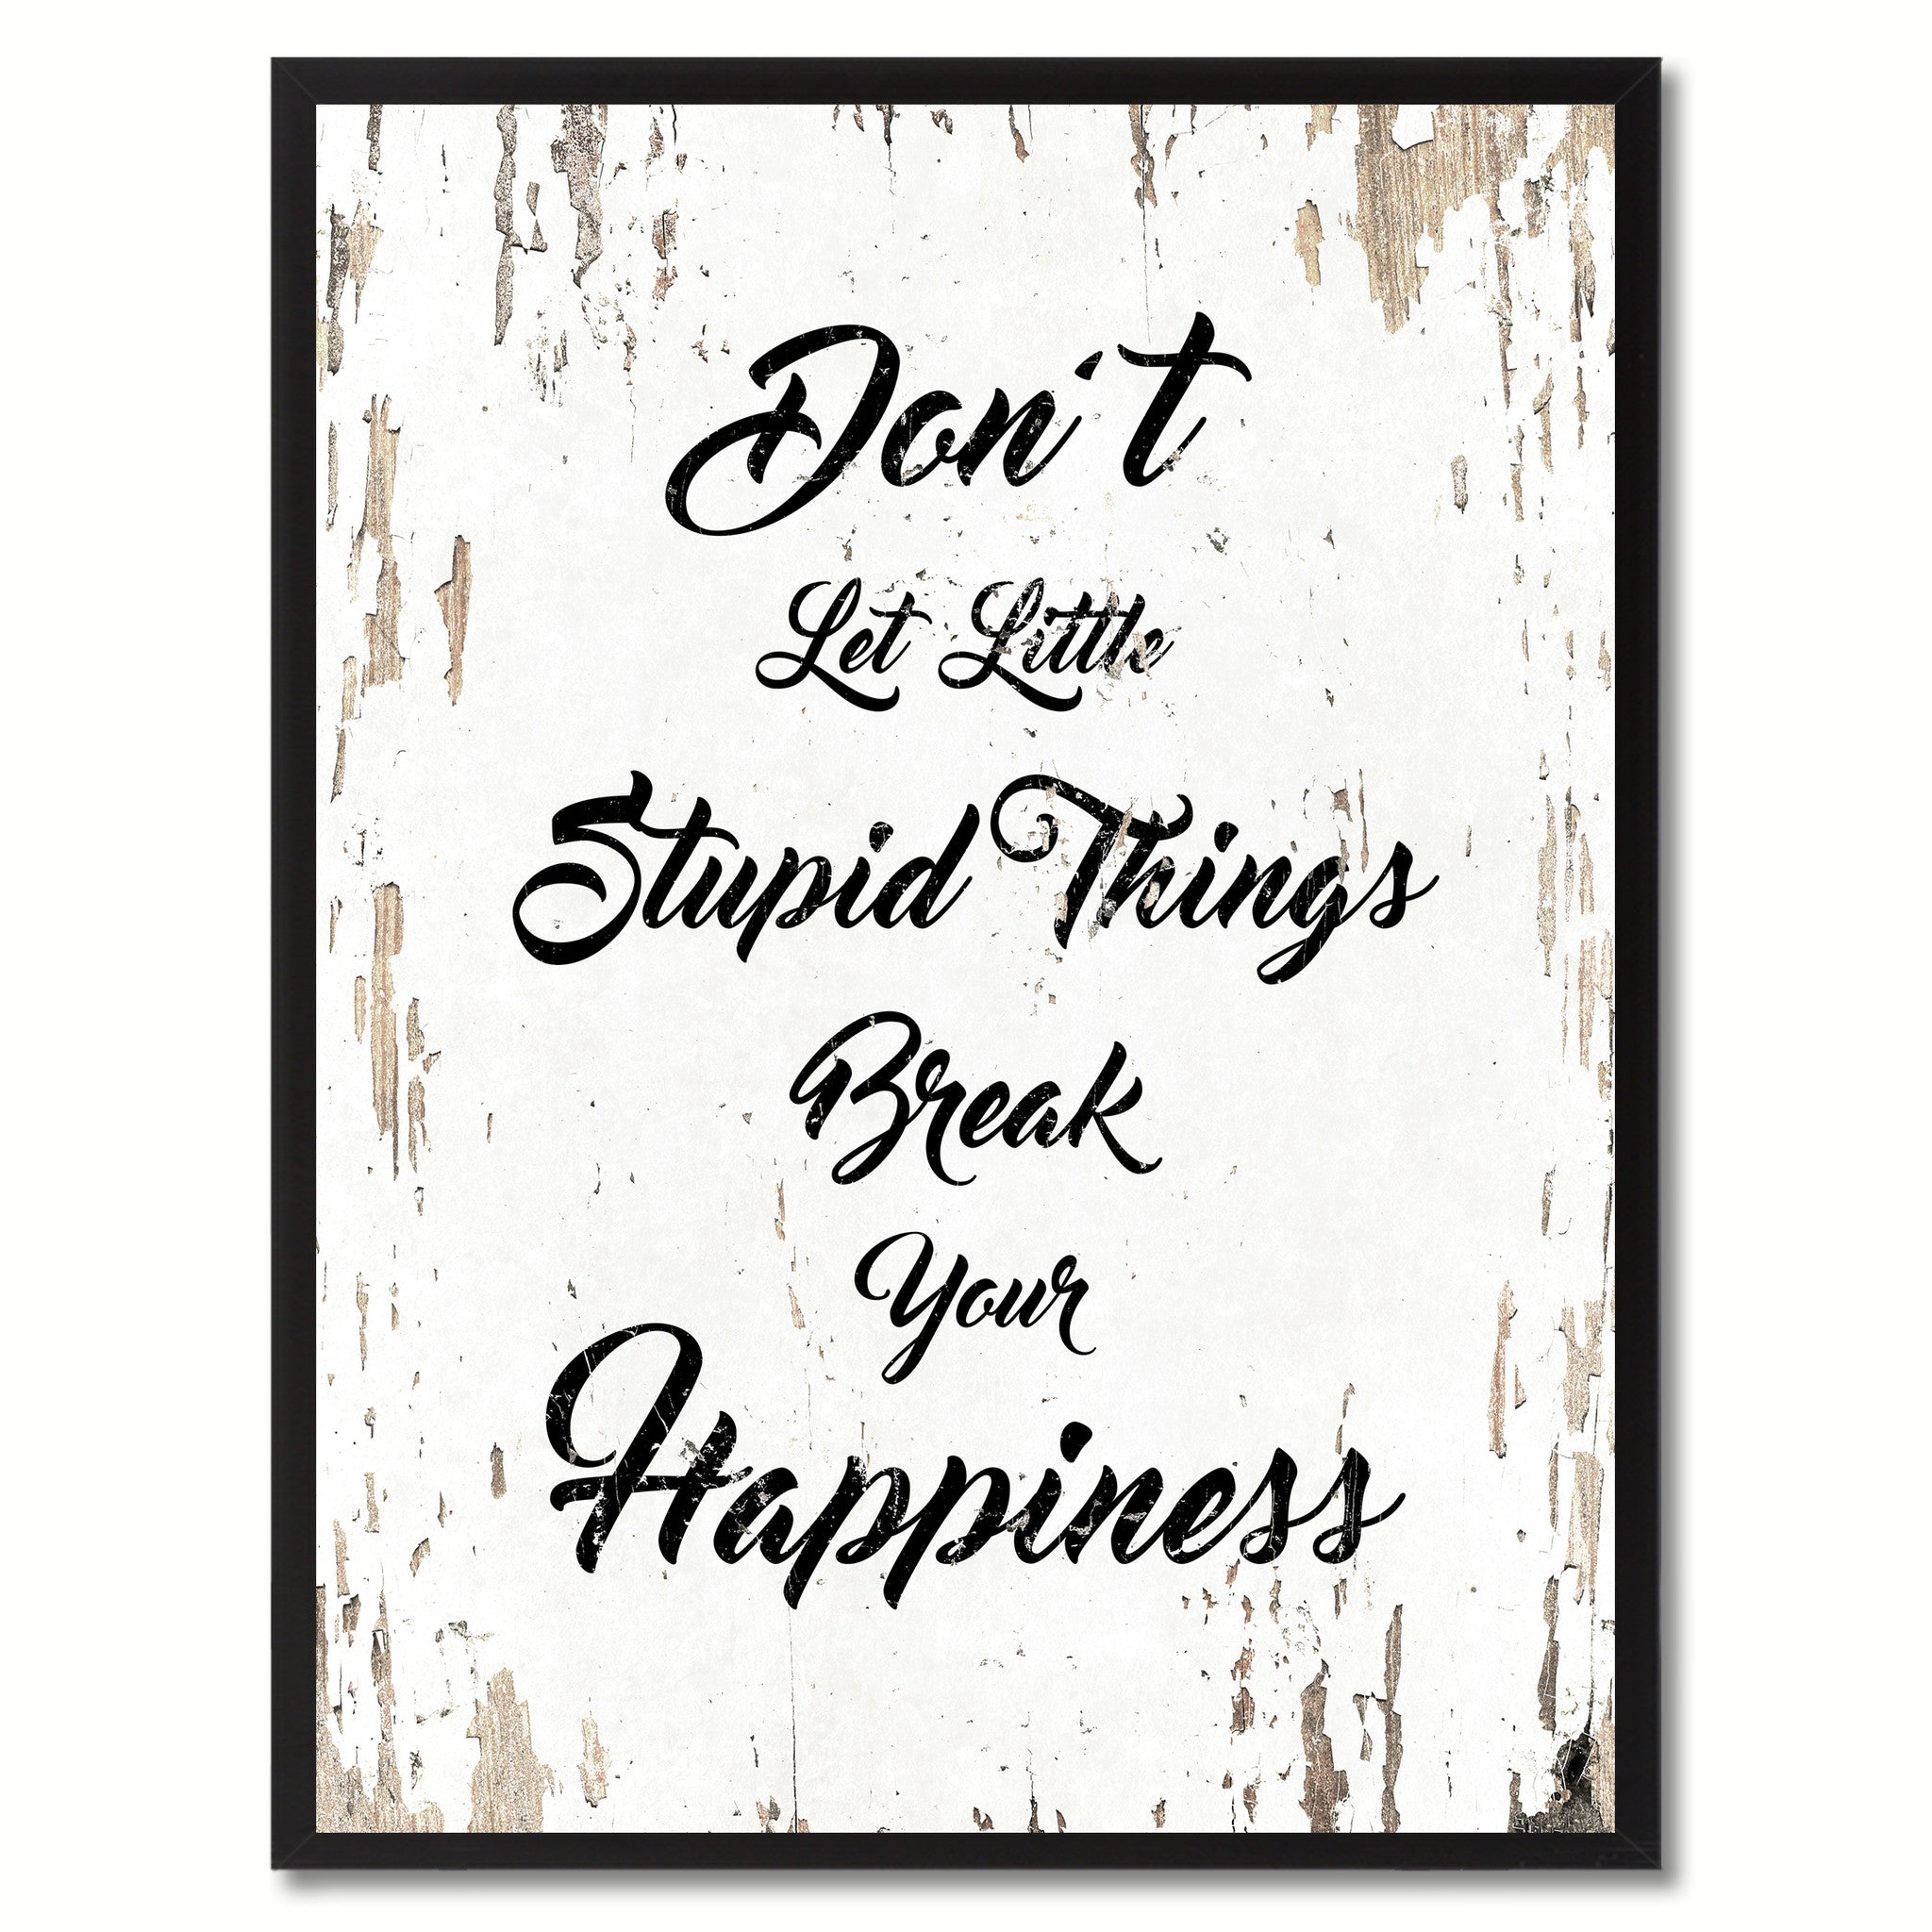 Don't let little stupid things break your happiness Inspirational Quote Saying Gift Ideas Home Decor Wall Art